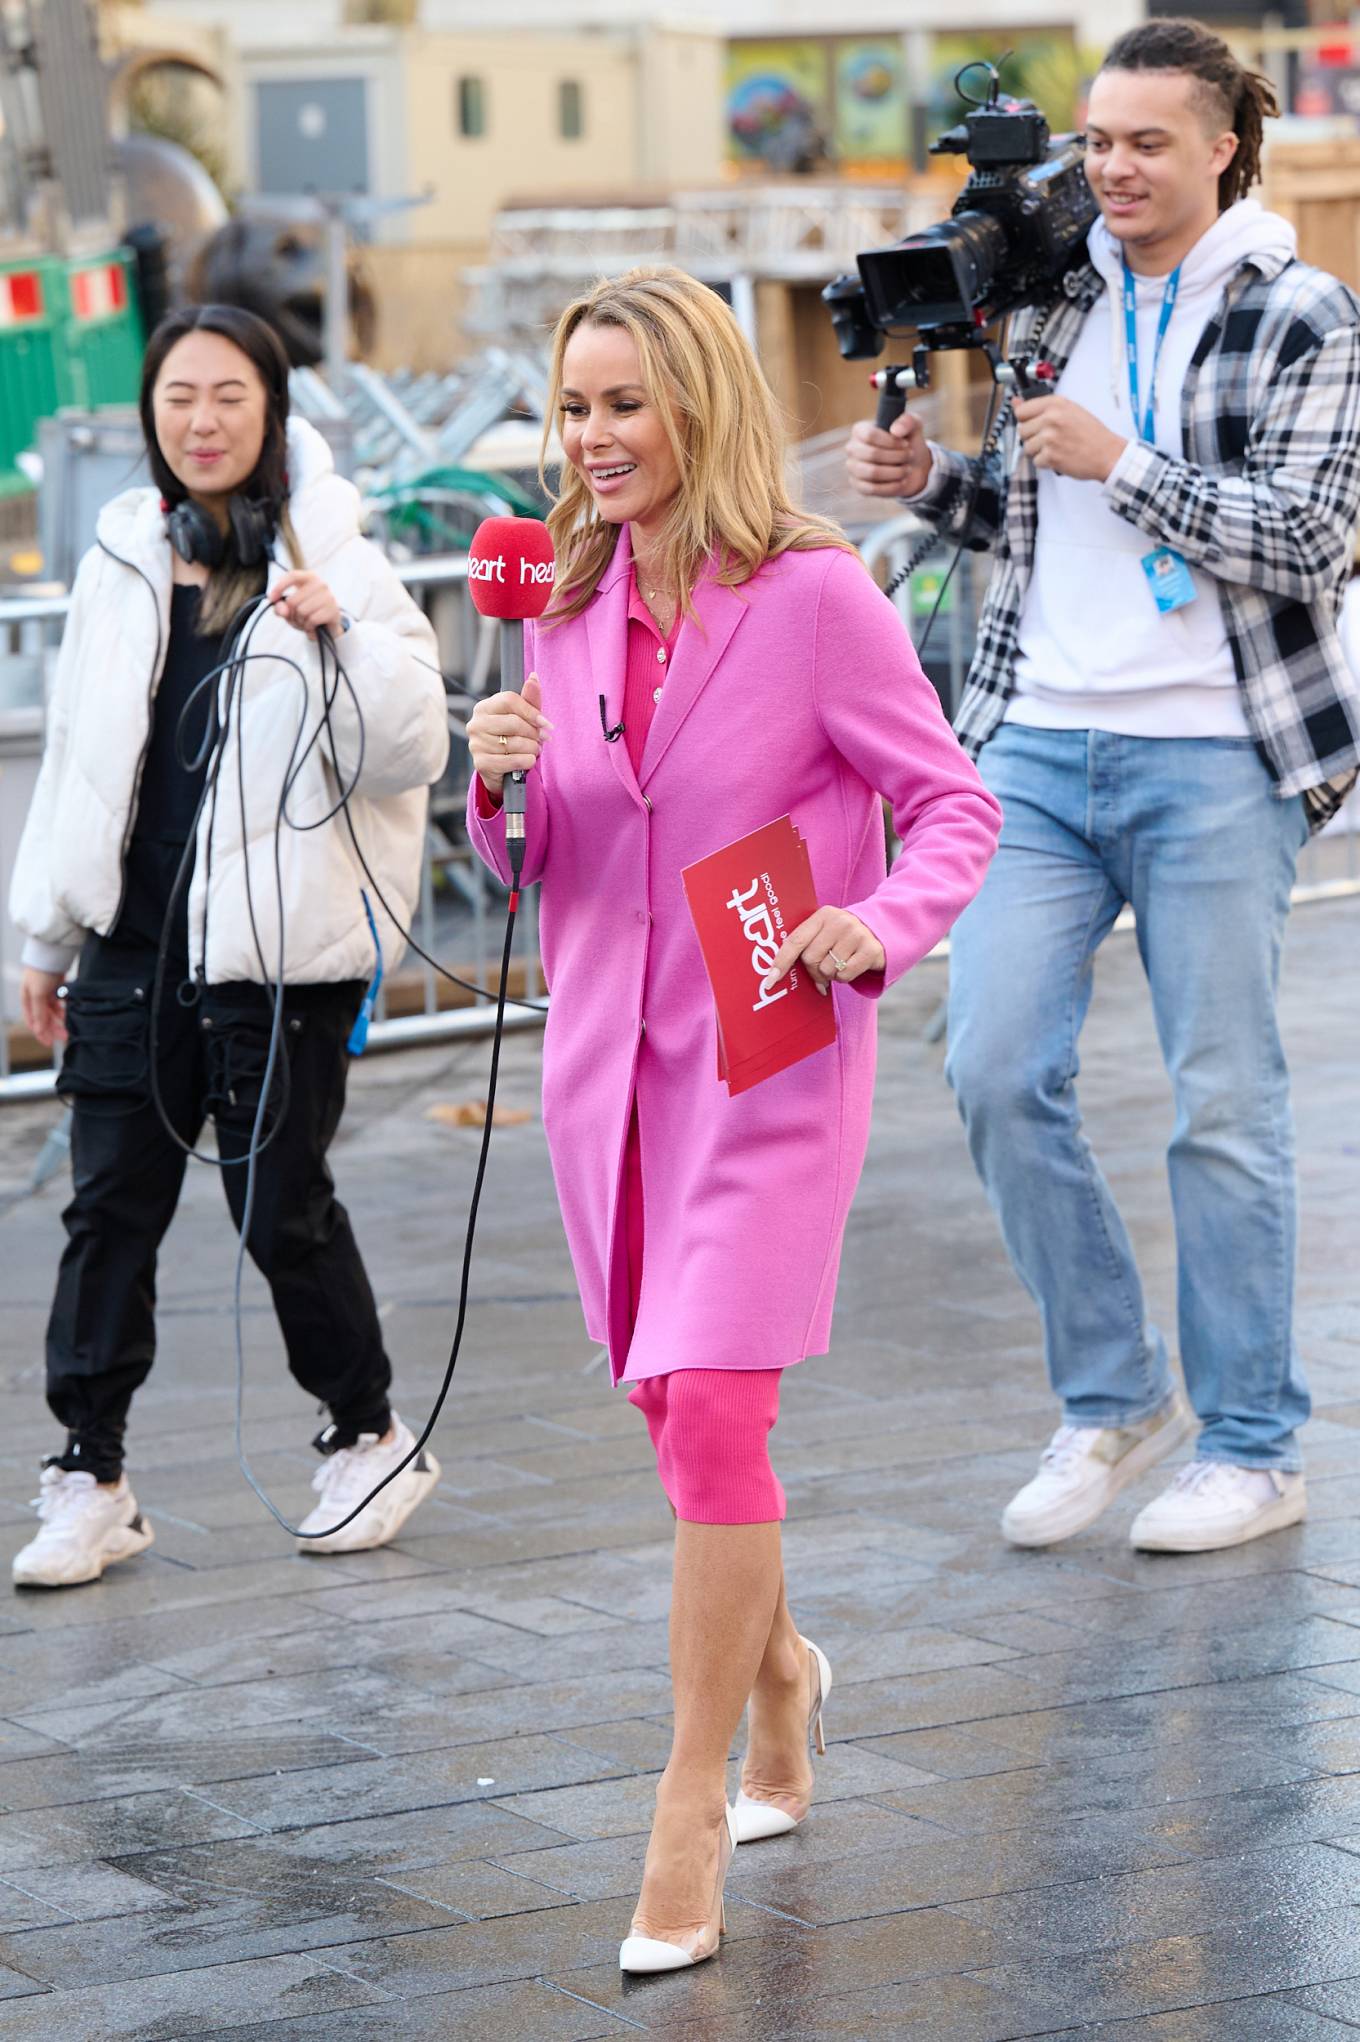 Amanda Holden 2022 : Amanda Holden – Interviewing members of the public at Global Radio in London-16